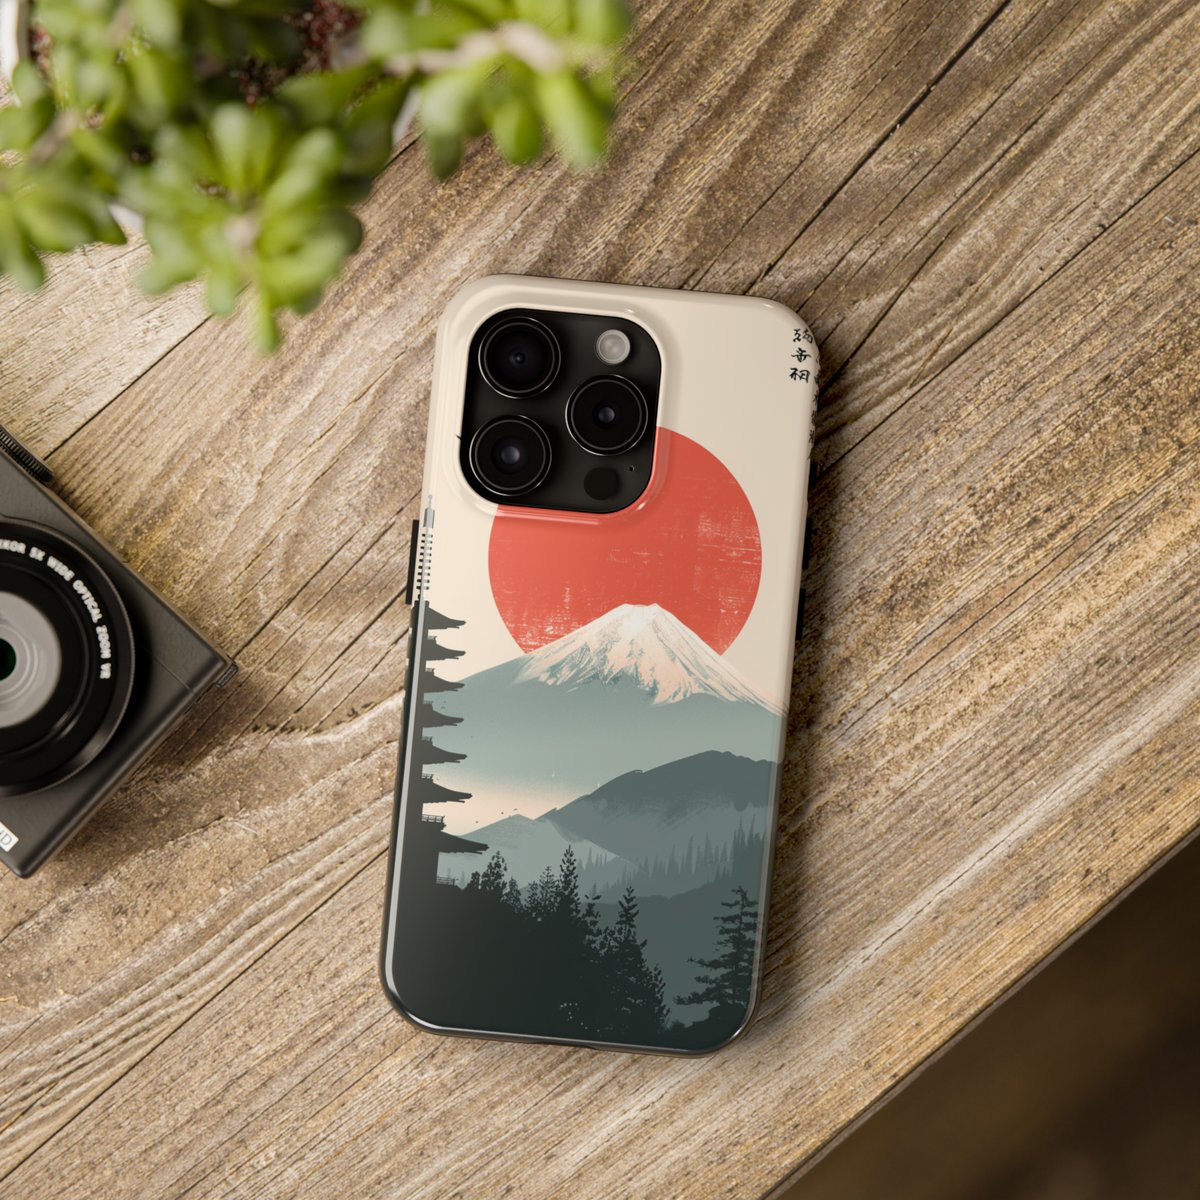 Japanese Night phone case for iPhone - Link in Bio!

#phonecase #iphonecase #aestheticphonecase #aesthetic #iphone11 #iphone12 #iphone13 #giftforhim #giftforher 
#japanese #japaneseart #JapaneseCulture #japanesefashion #japanesephonecase #japanlife #japantravel #japantrip #FUJI